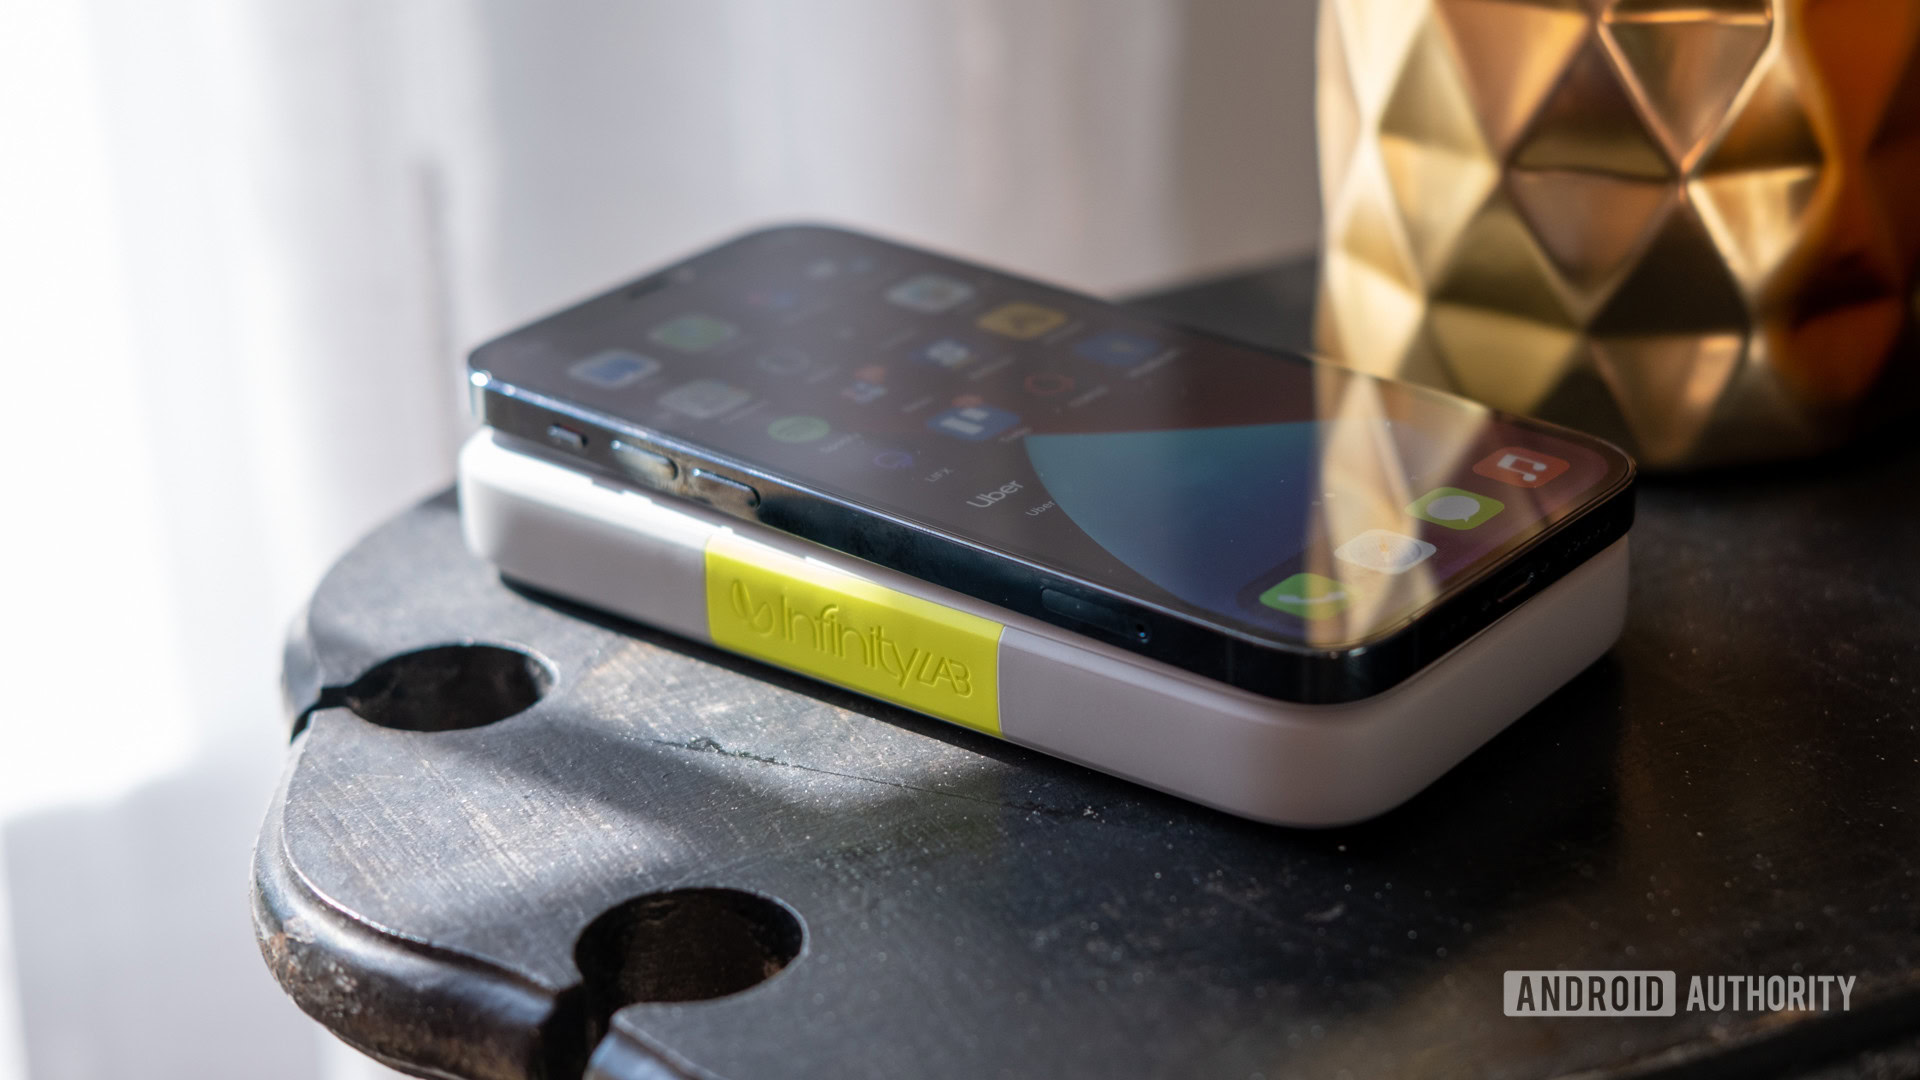 The InfinityLab InstantGo power bank wirelessly charging an iPhone 12 Pro